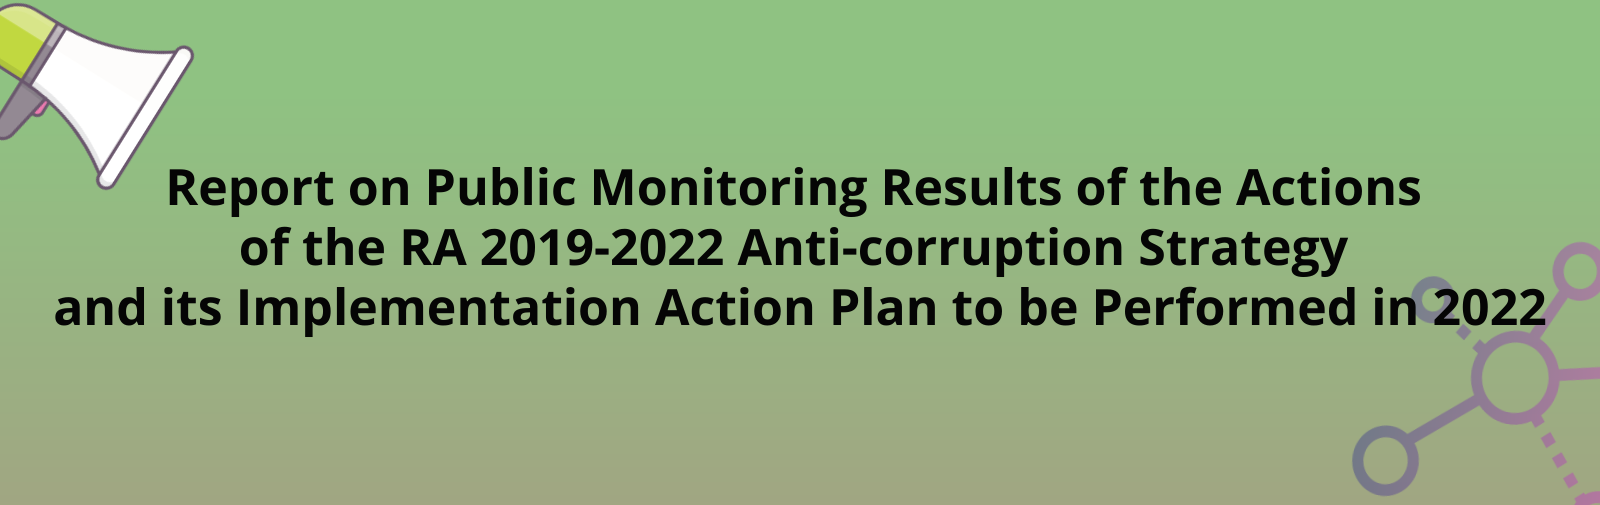 Report on Public Monitoring Results of the Actions of the Republic of Armenia Anti-Corruption Strategy and its Implementation Action Plan for 2019-2022 to be performed in 2022 has been published